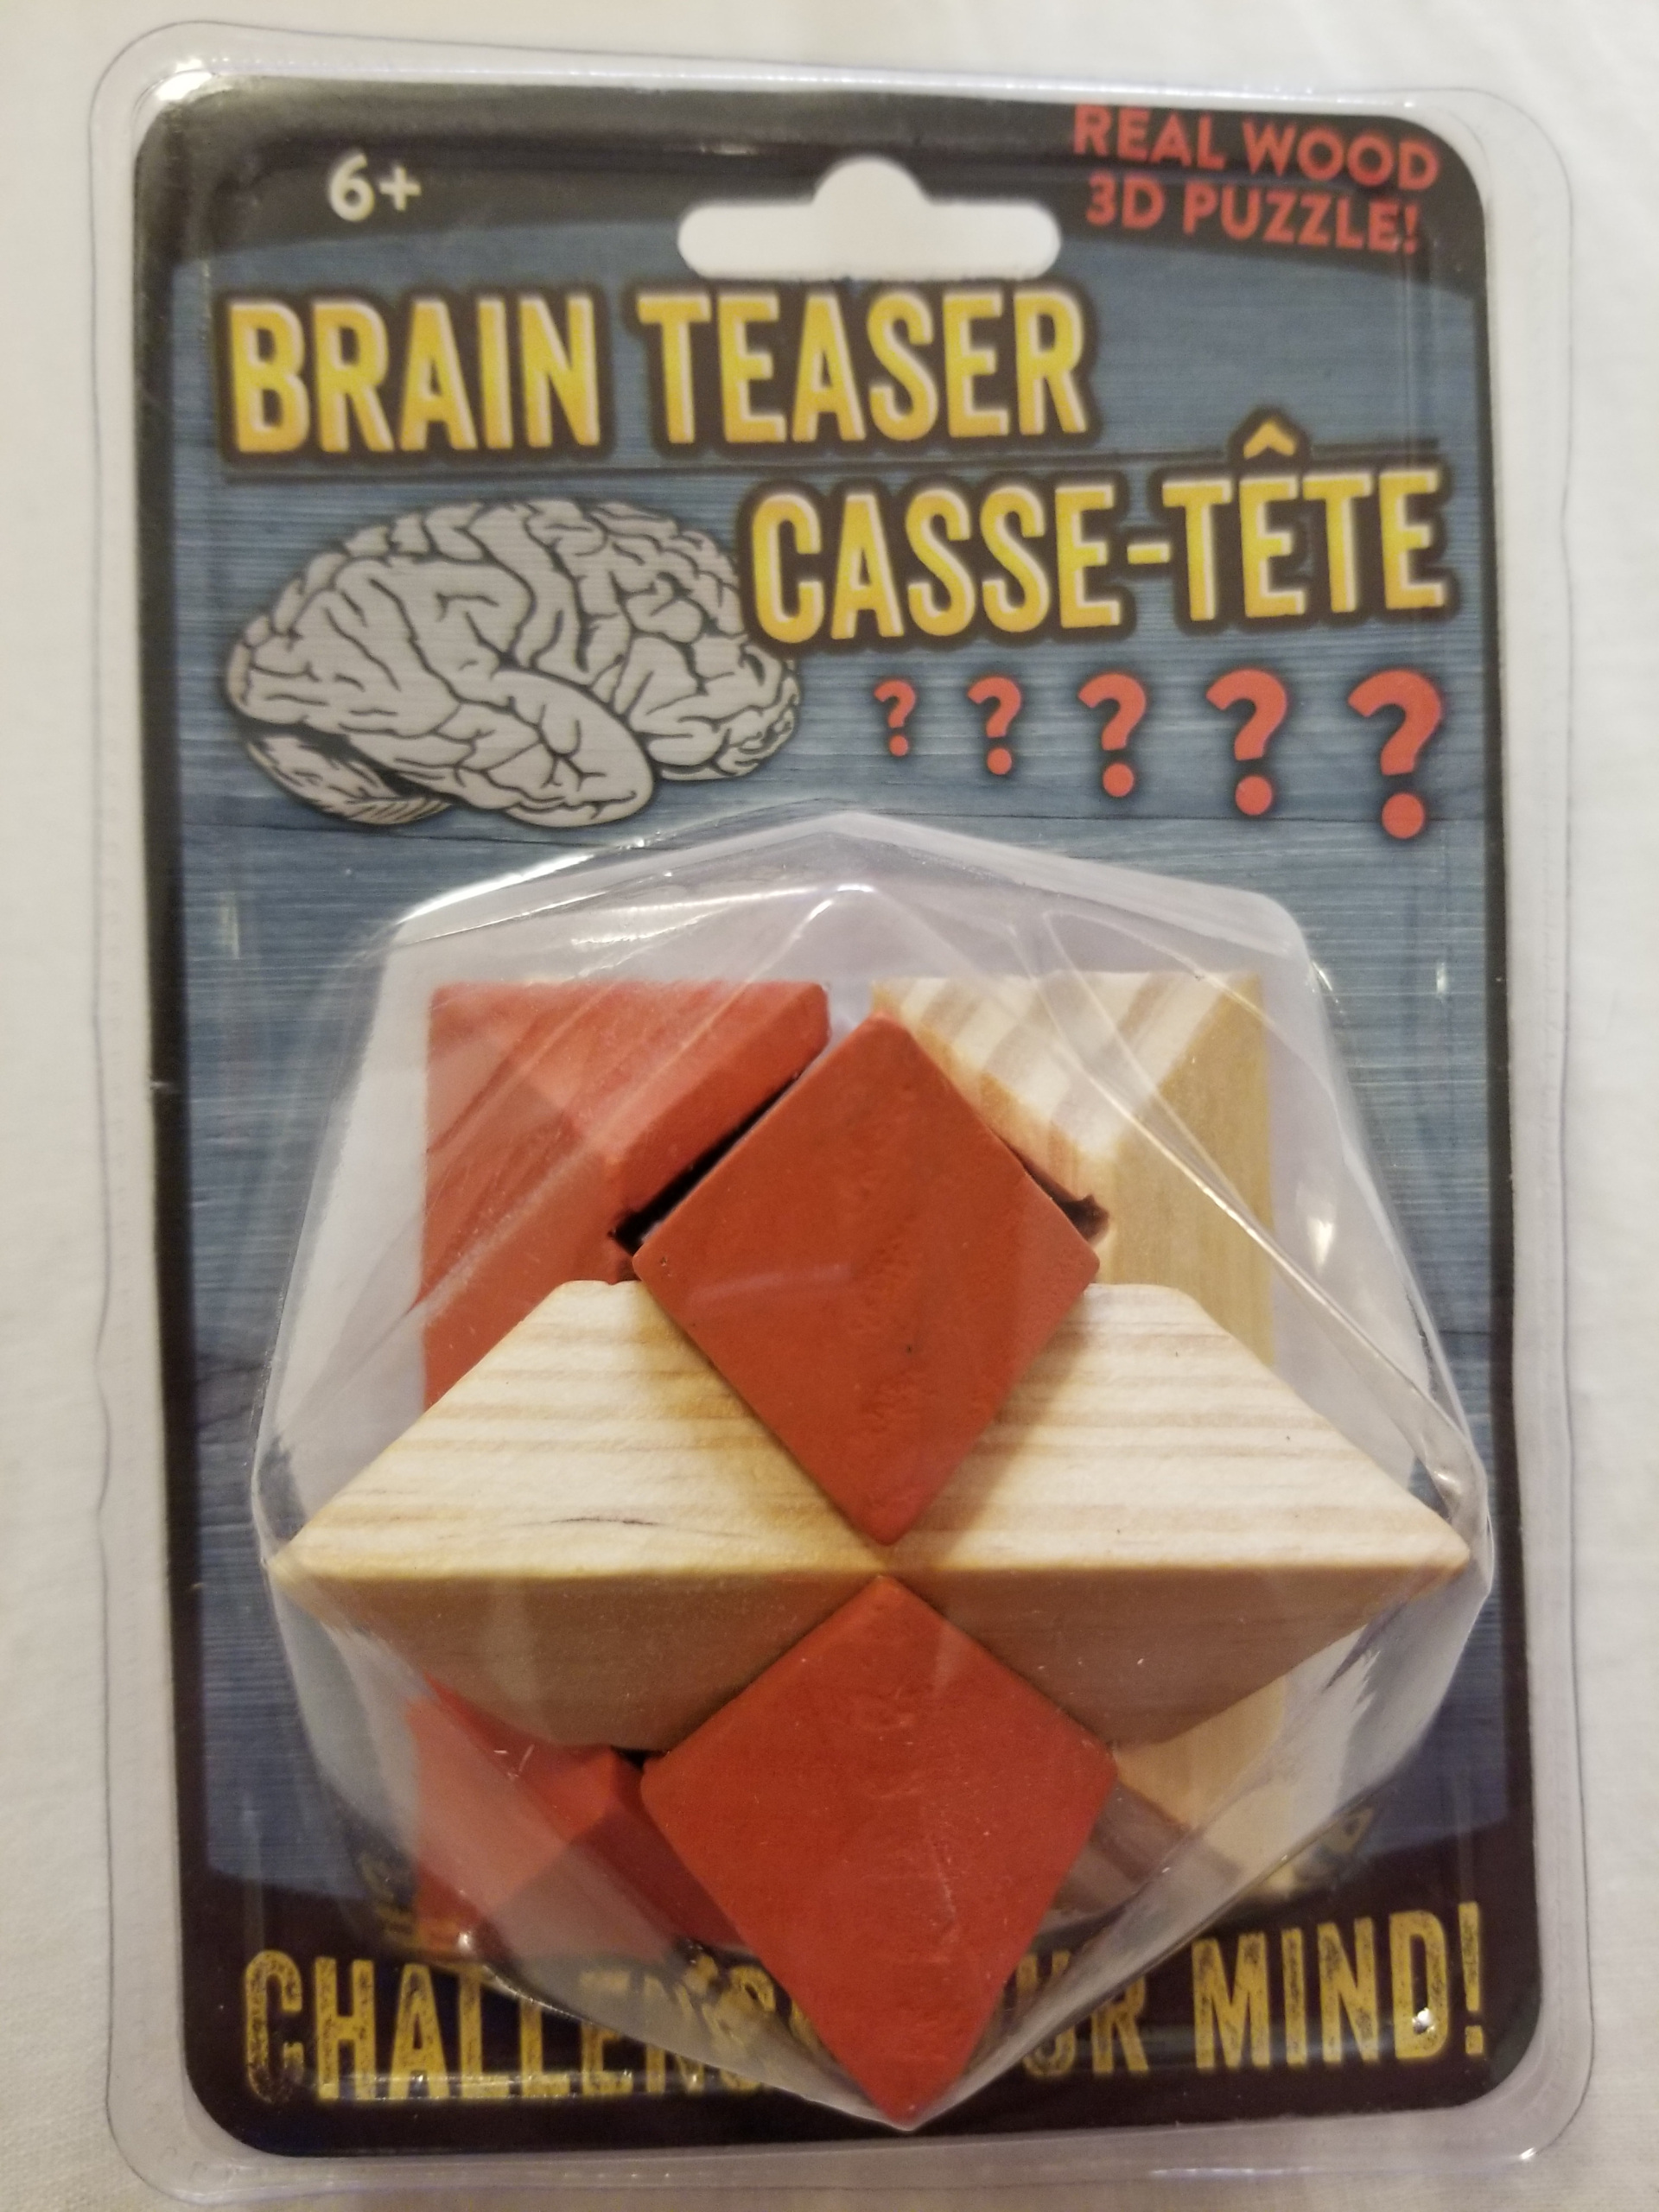 Real Wood 3d Puzzle Brain Teaser Casse-tete 3x3 With Instruction for sale online